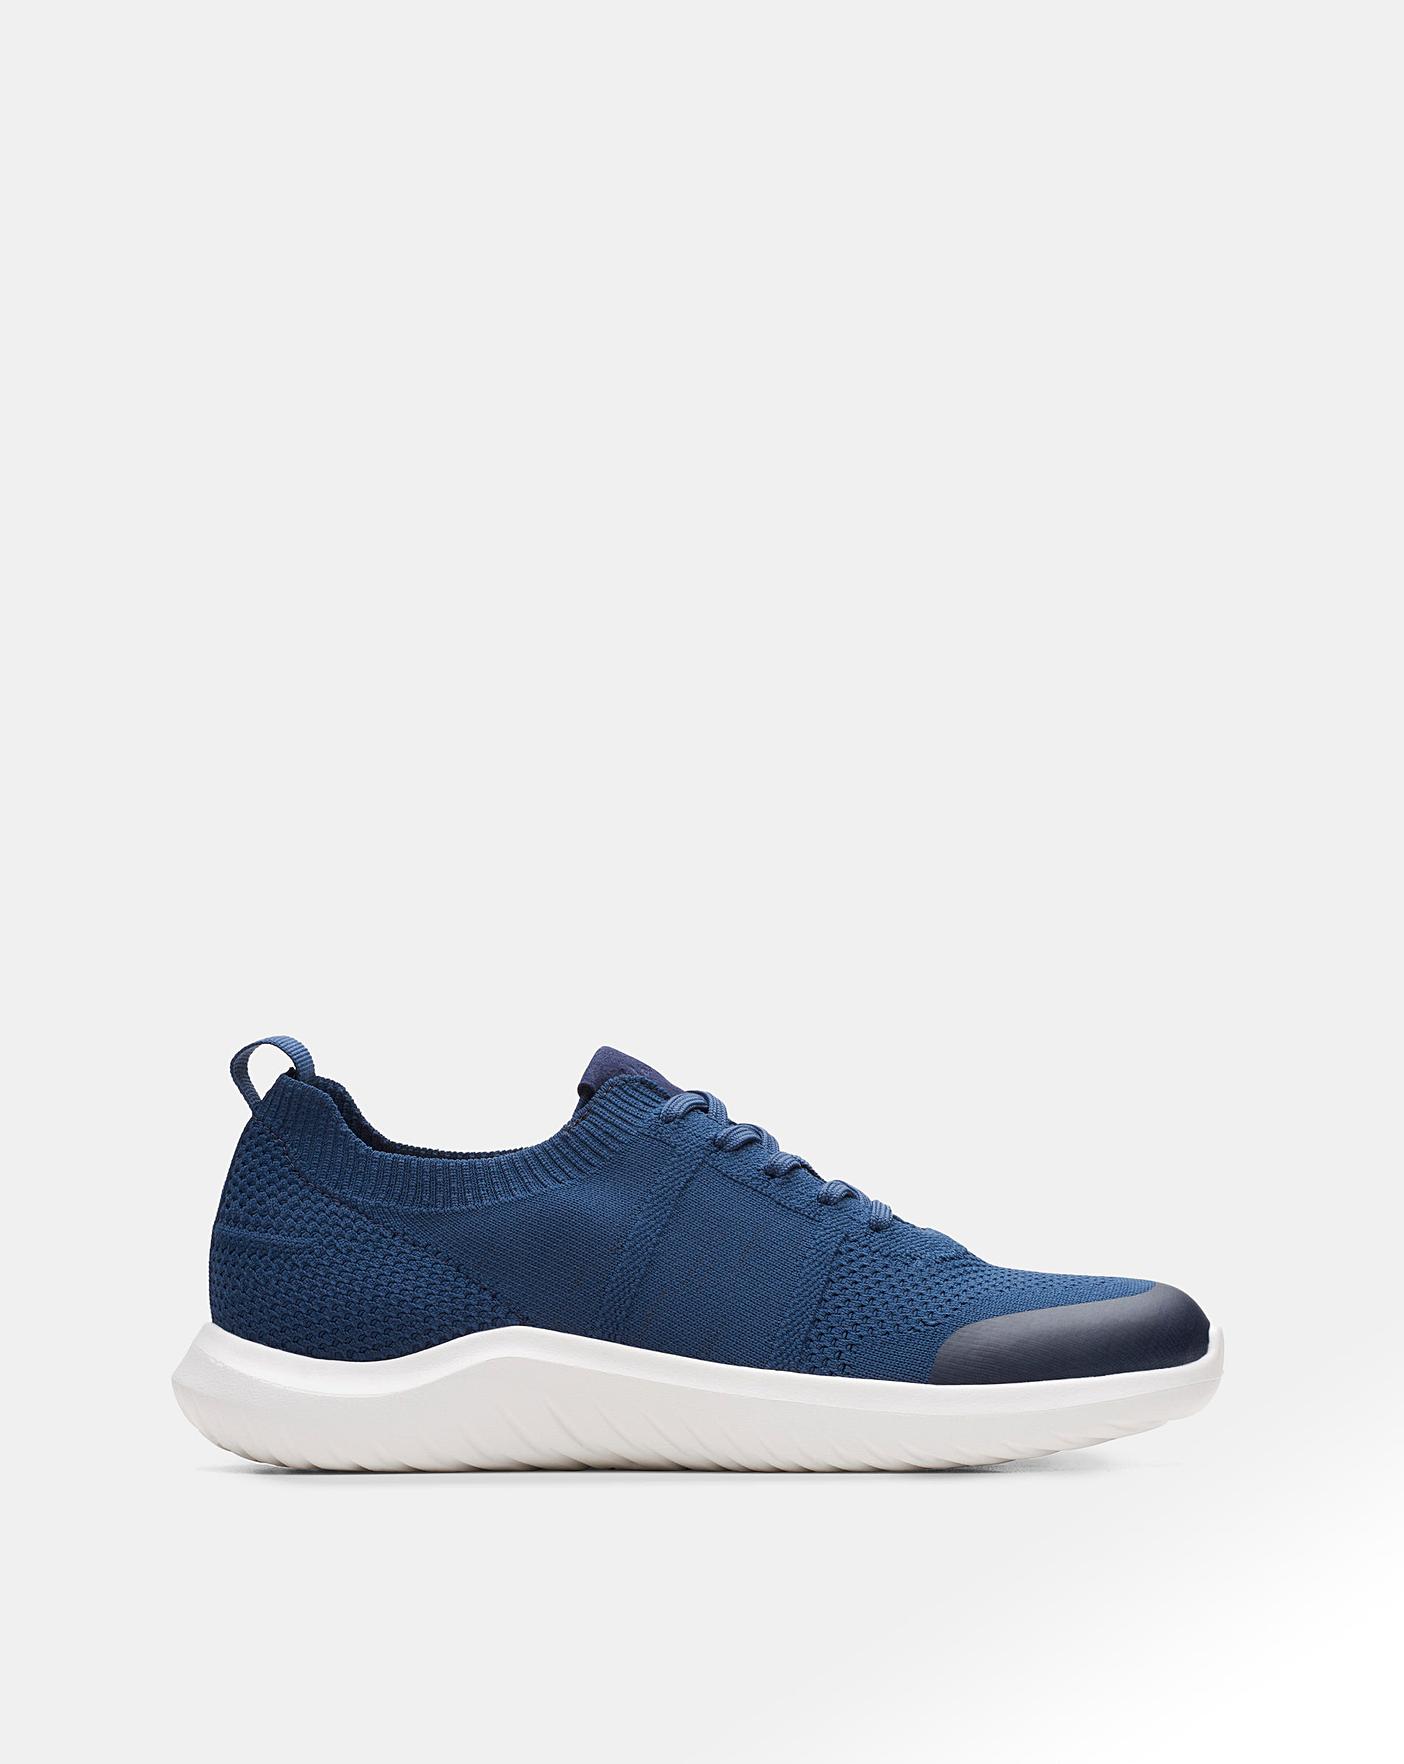 Clarks Novalite Lace Up Trainers | J D Williams